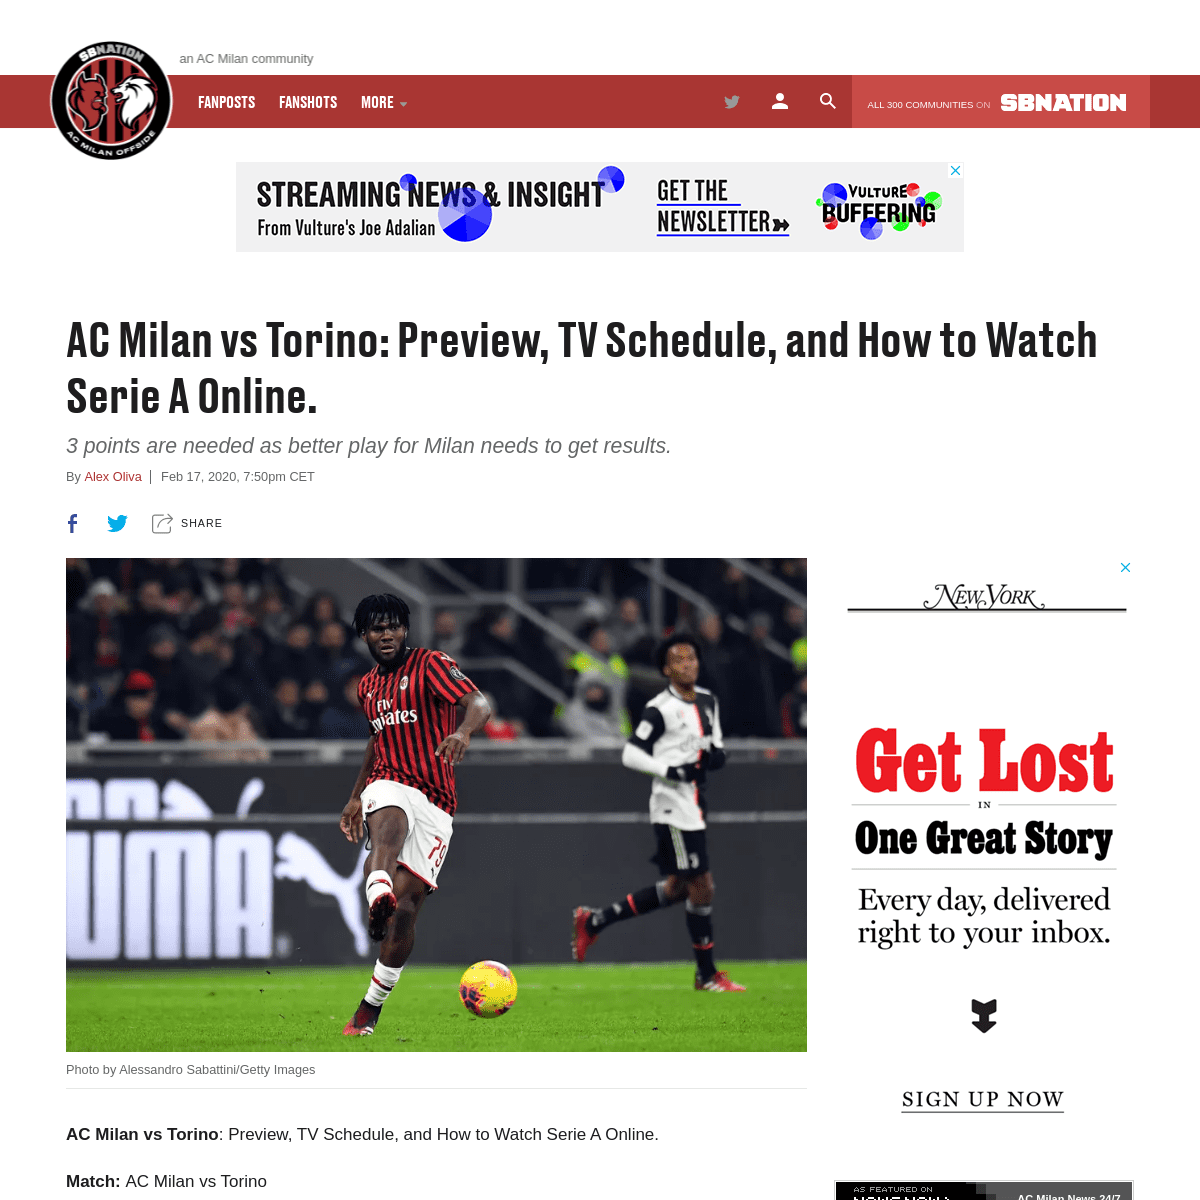 A complete backup of acmilan.theoffside.com/2020/2/17/21140955/ac-milan-vs-torino-preview-tv-schedule-and-how-to-watch-serie-a-o